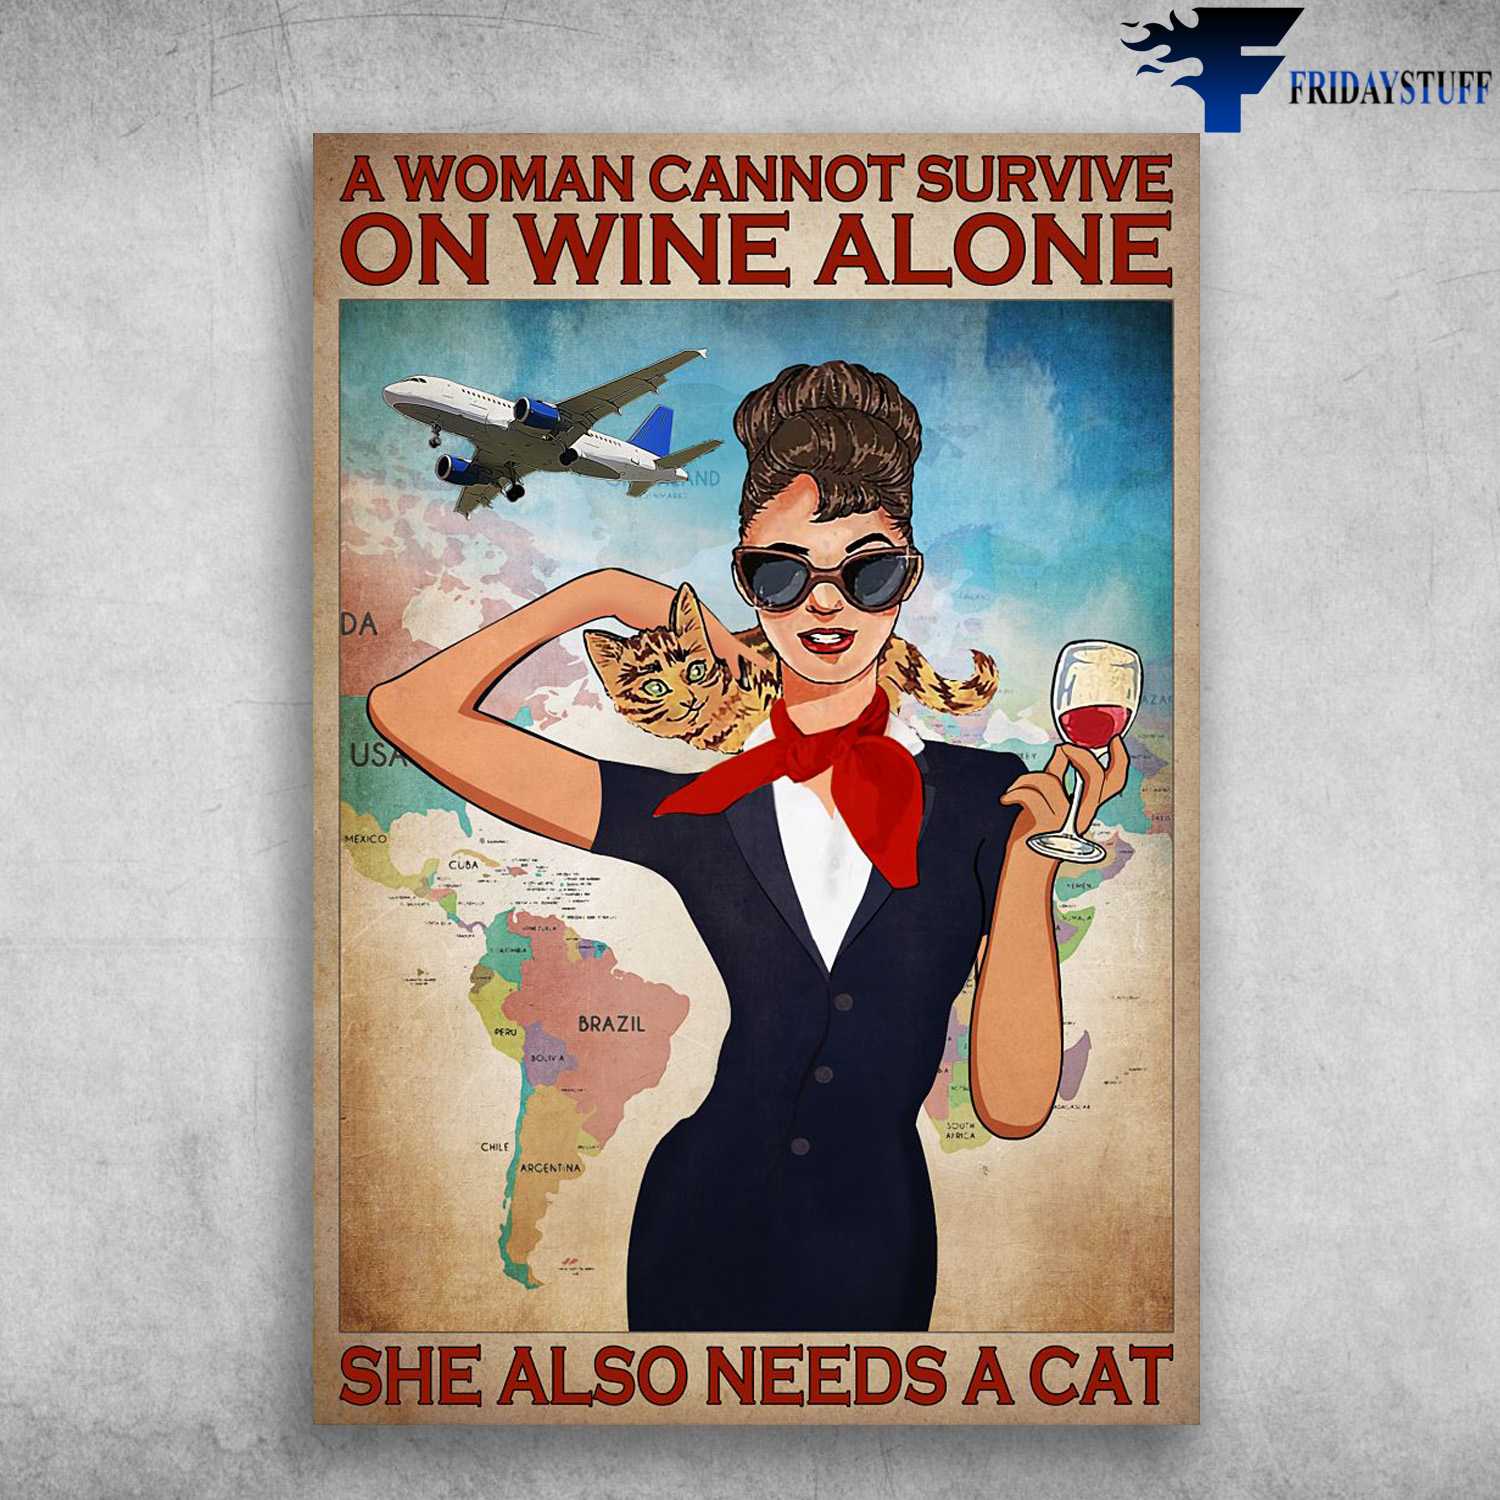 Flight Attendant Cat - A Woman Cannot Survive On Wine Alone, She Also Needs A Cat